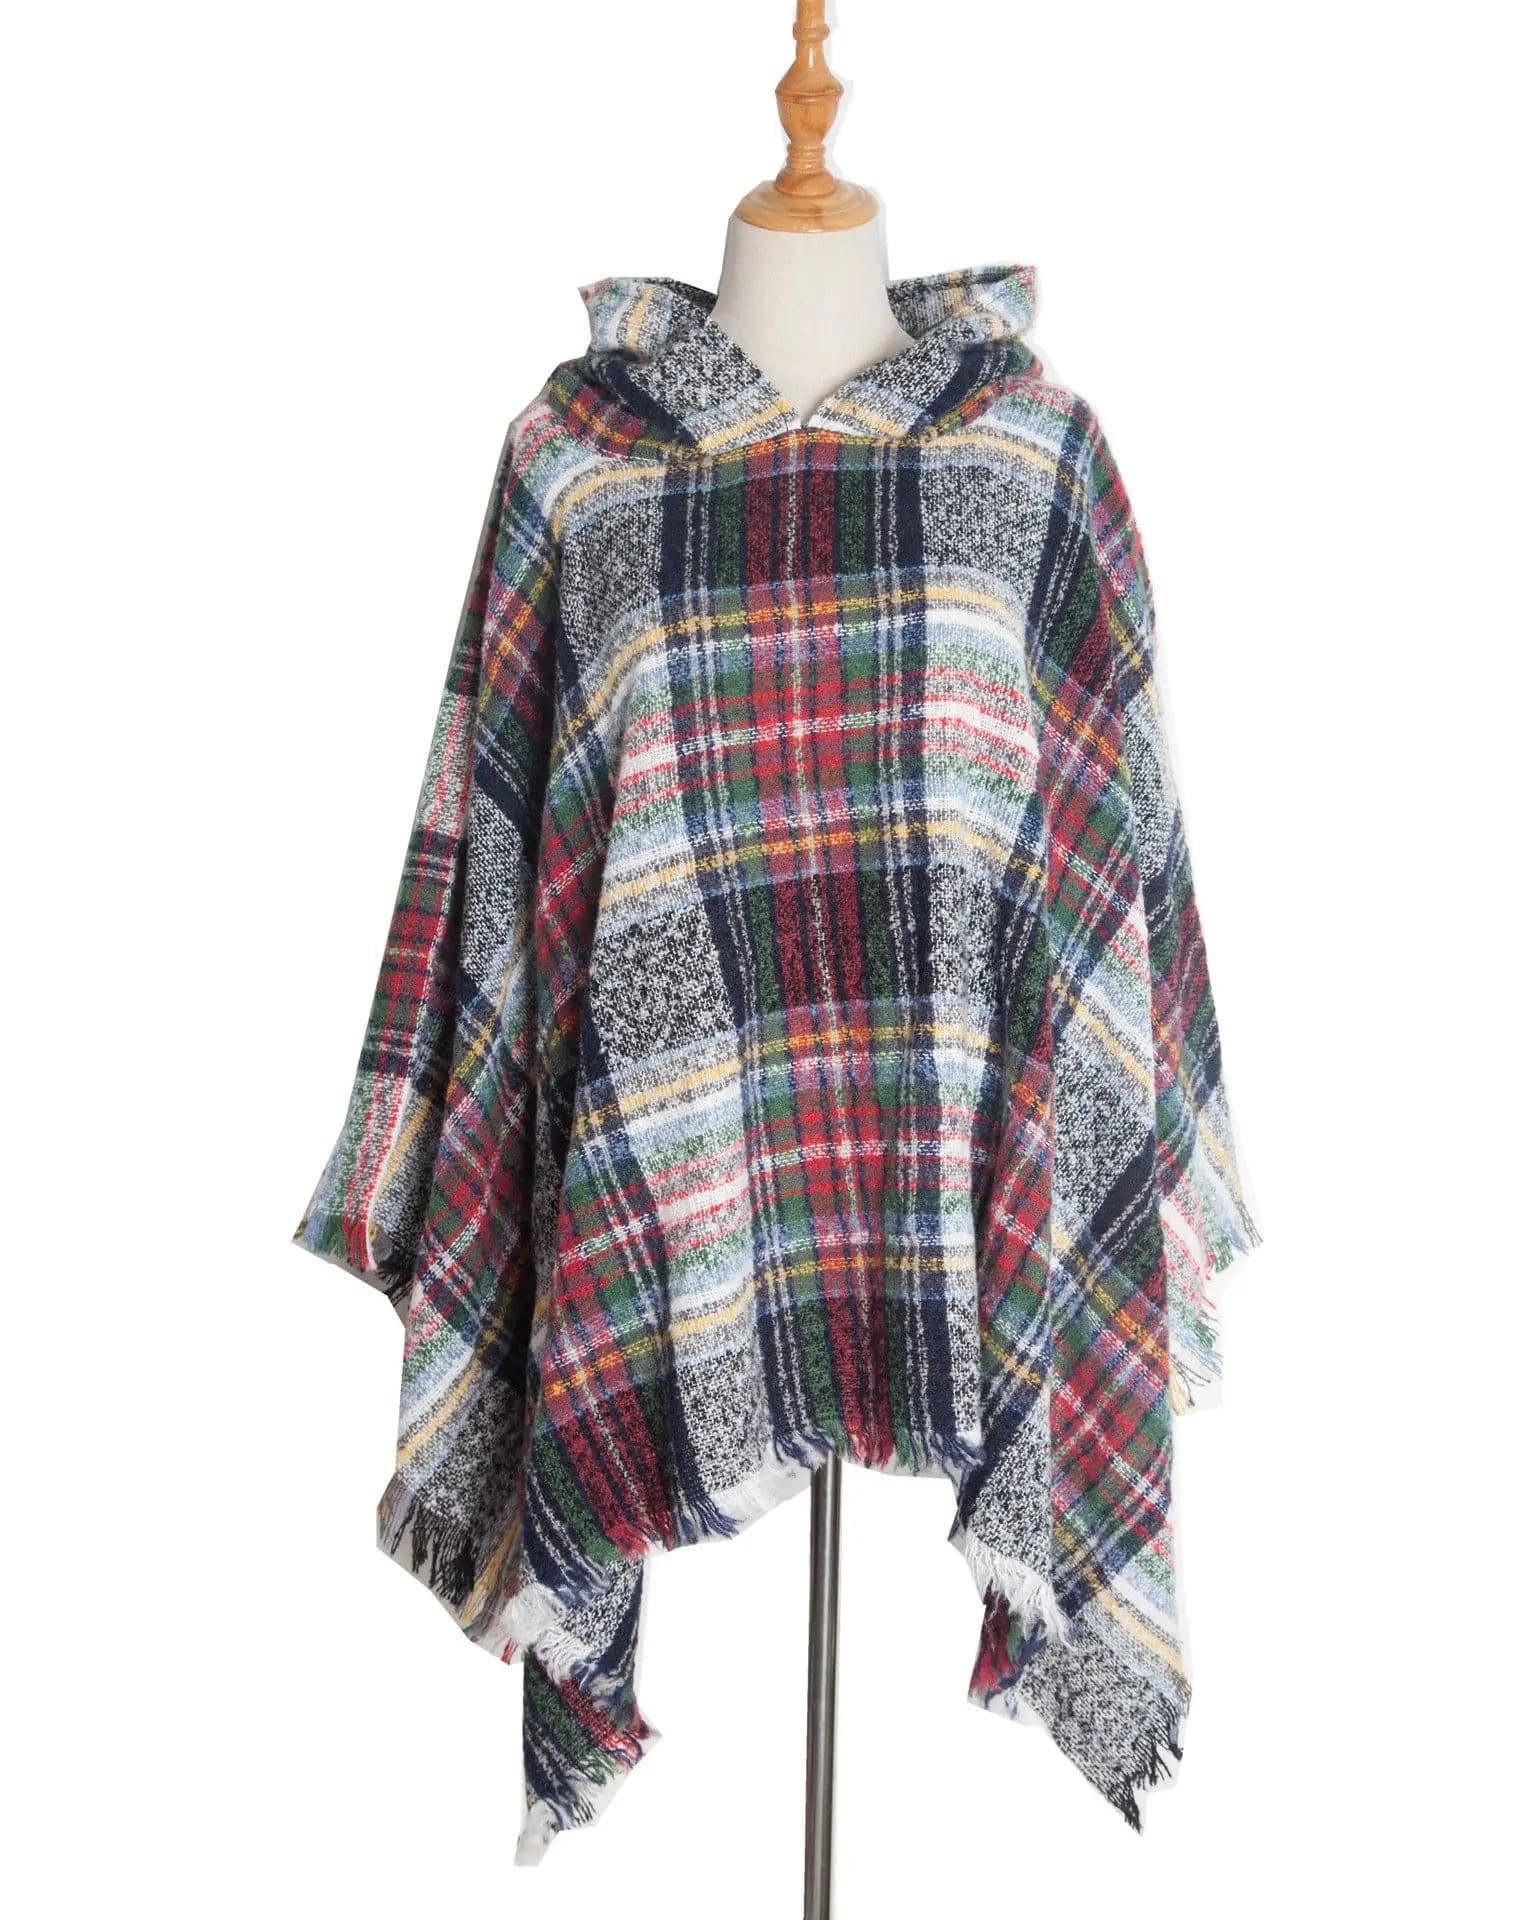 Spring Autumn And Winter Plaid Ribbon Cap Cape And Shawl-DP7 01 White Colorful-10